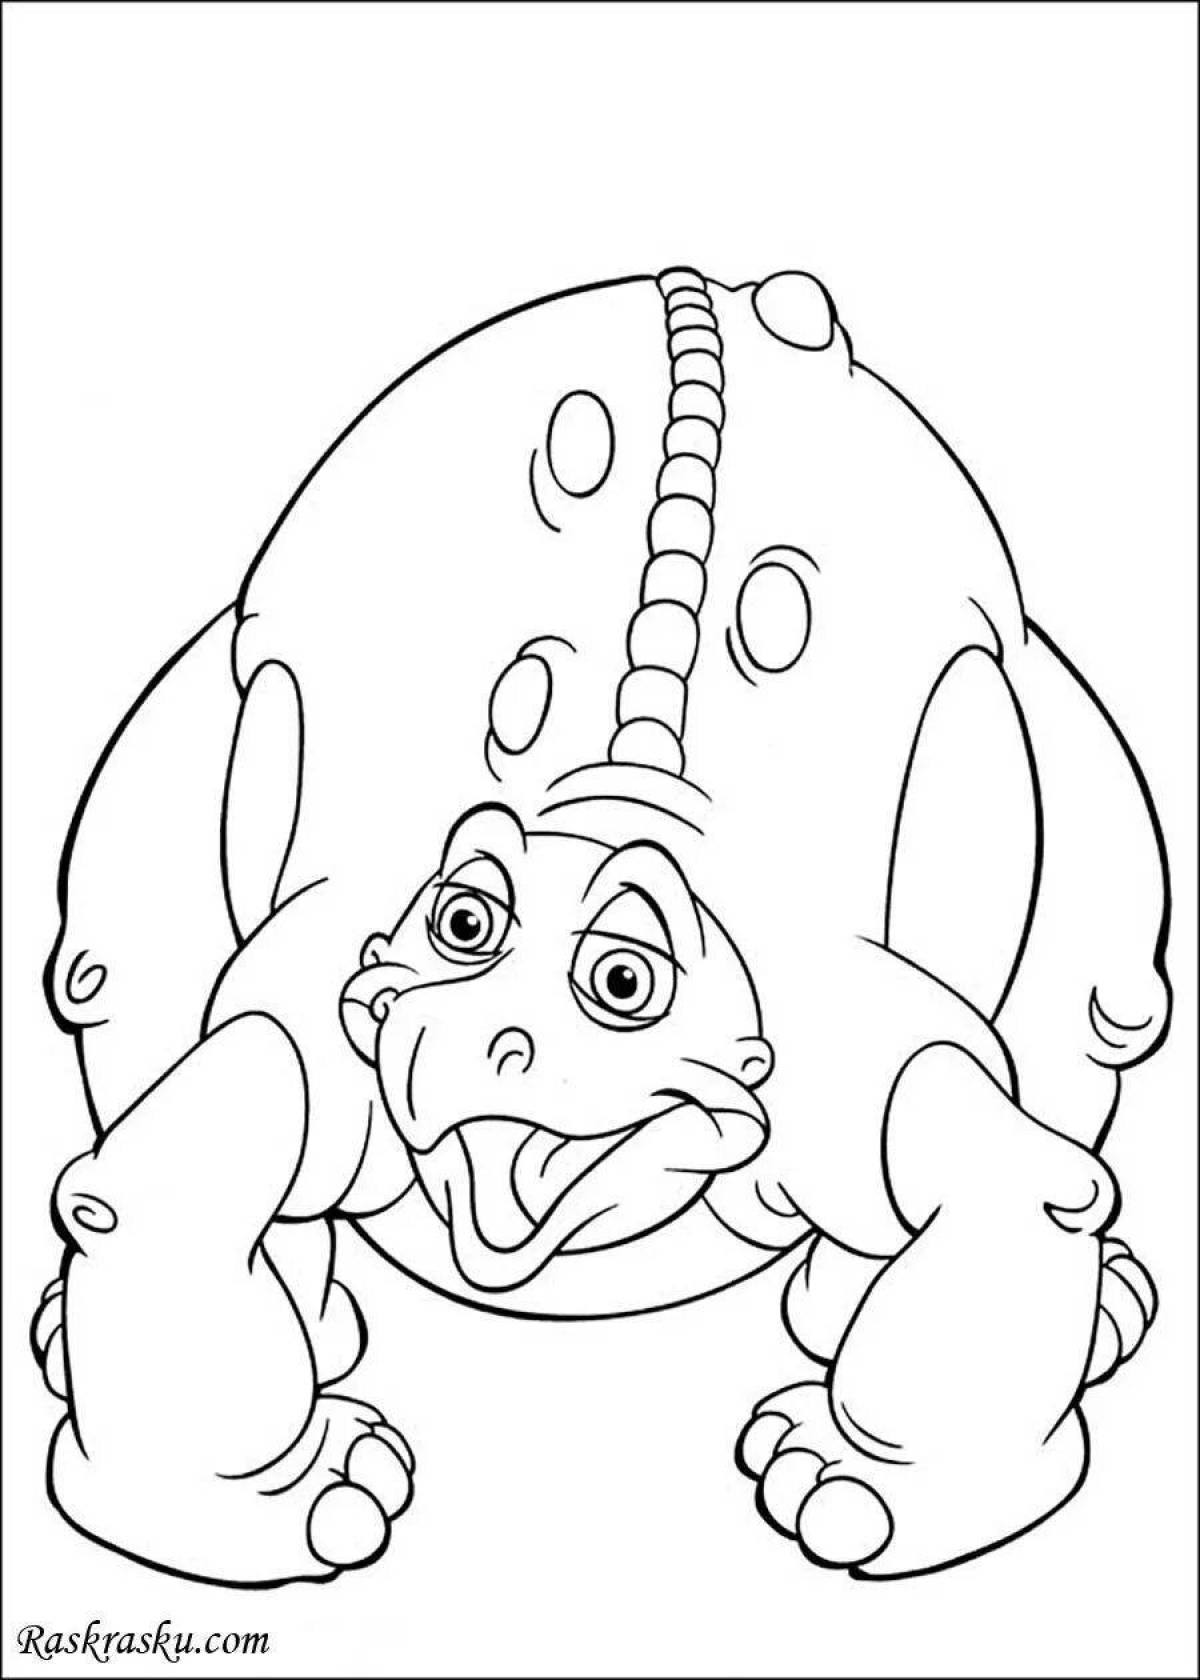 Fun critter coloring page